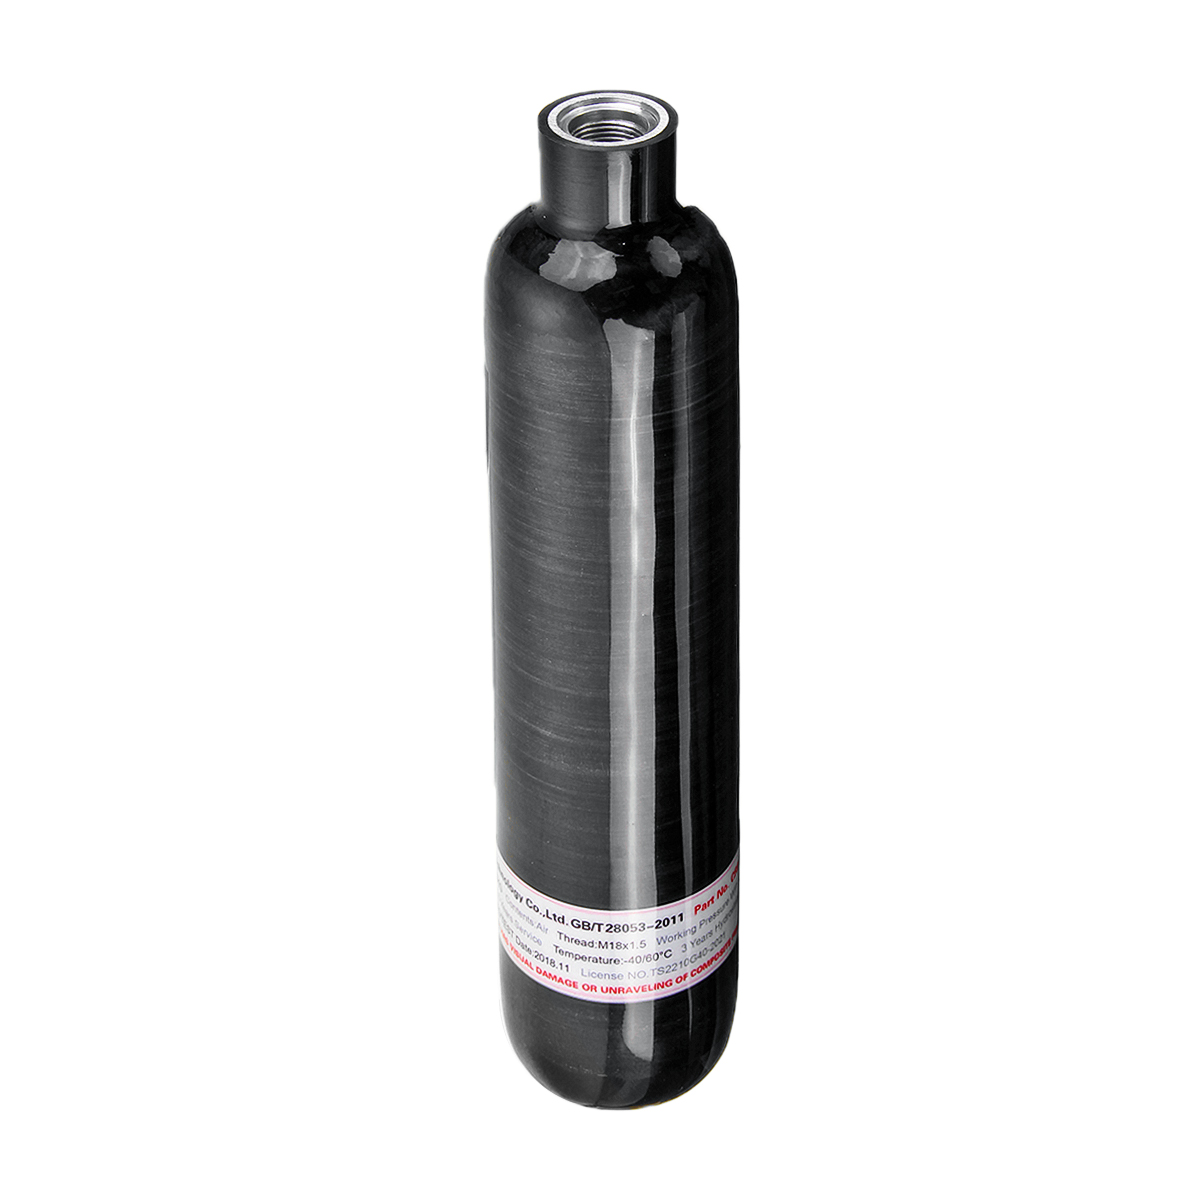 

0.5L 30Mpa Paintball Compressed Air Tank Thread M18x1.5 For Diving Equipment Set